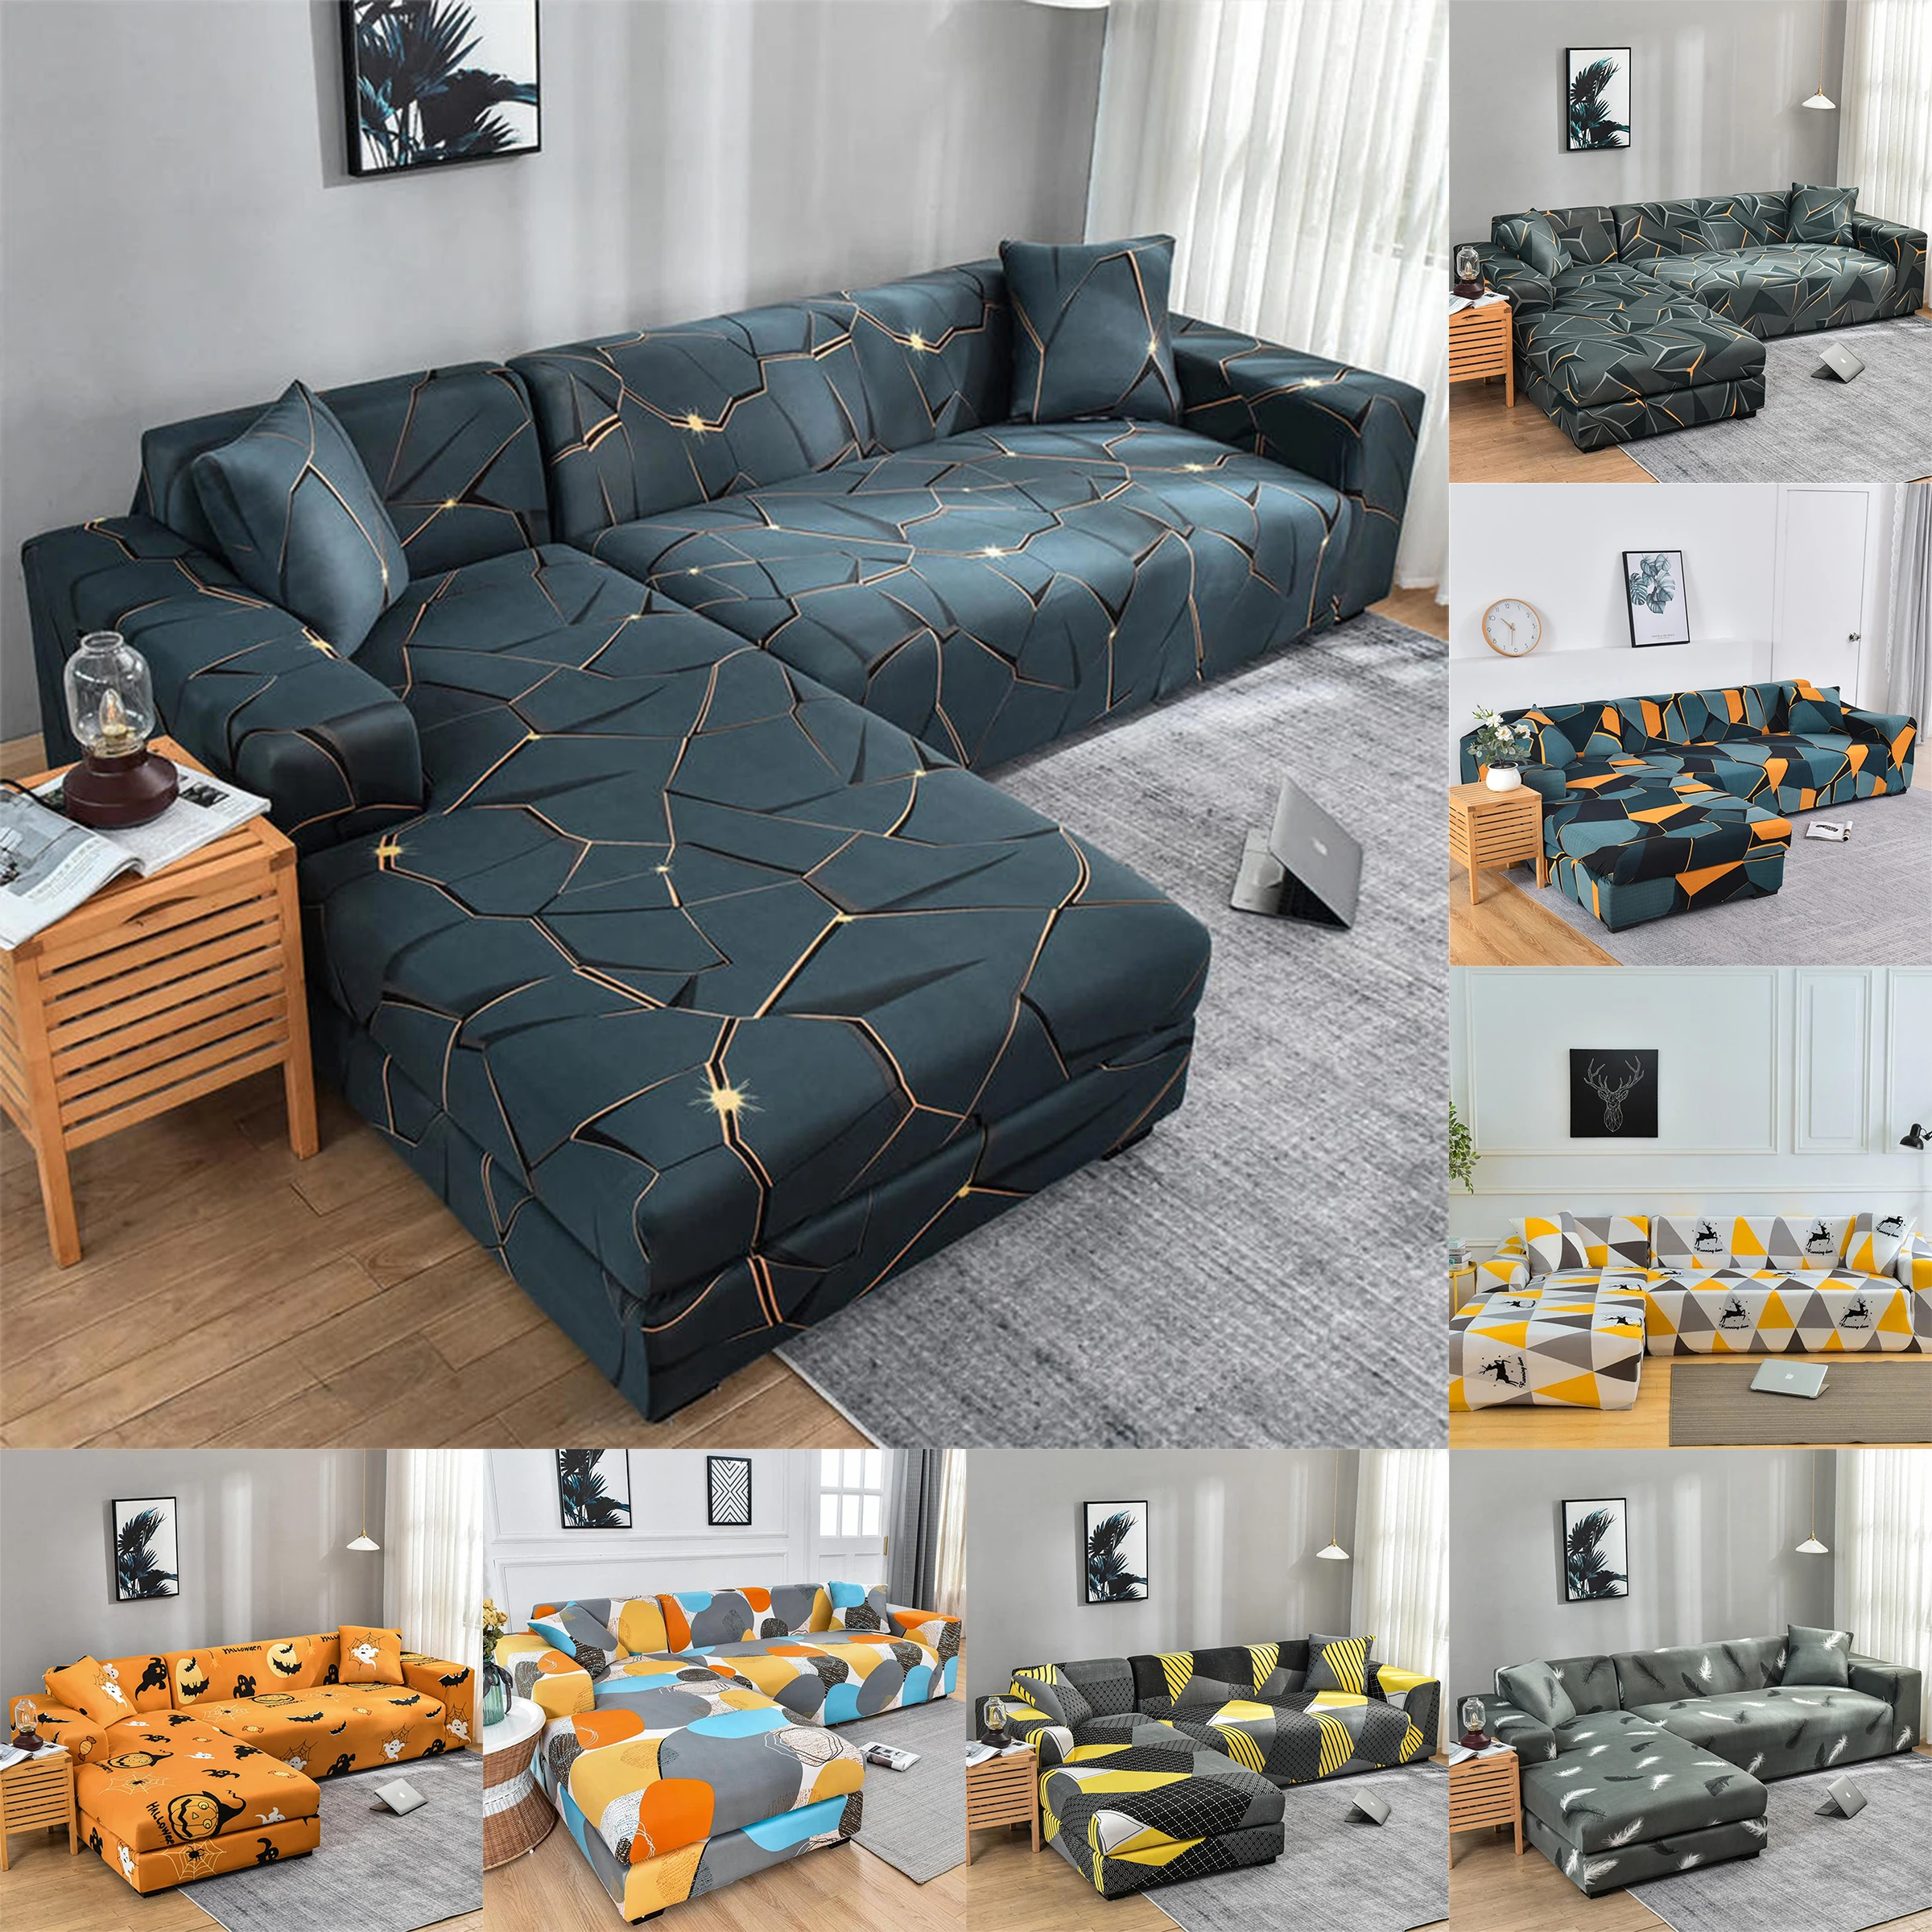 

Elastic Sofa Covers for Living Room Stretch Slipcovers Sectional Couch Cover L Shape Corner Armchair Cover 1/2/3/4 Seater Covers